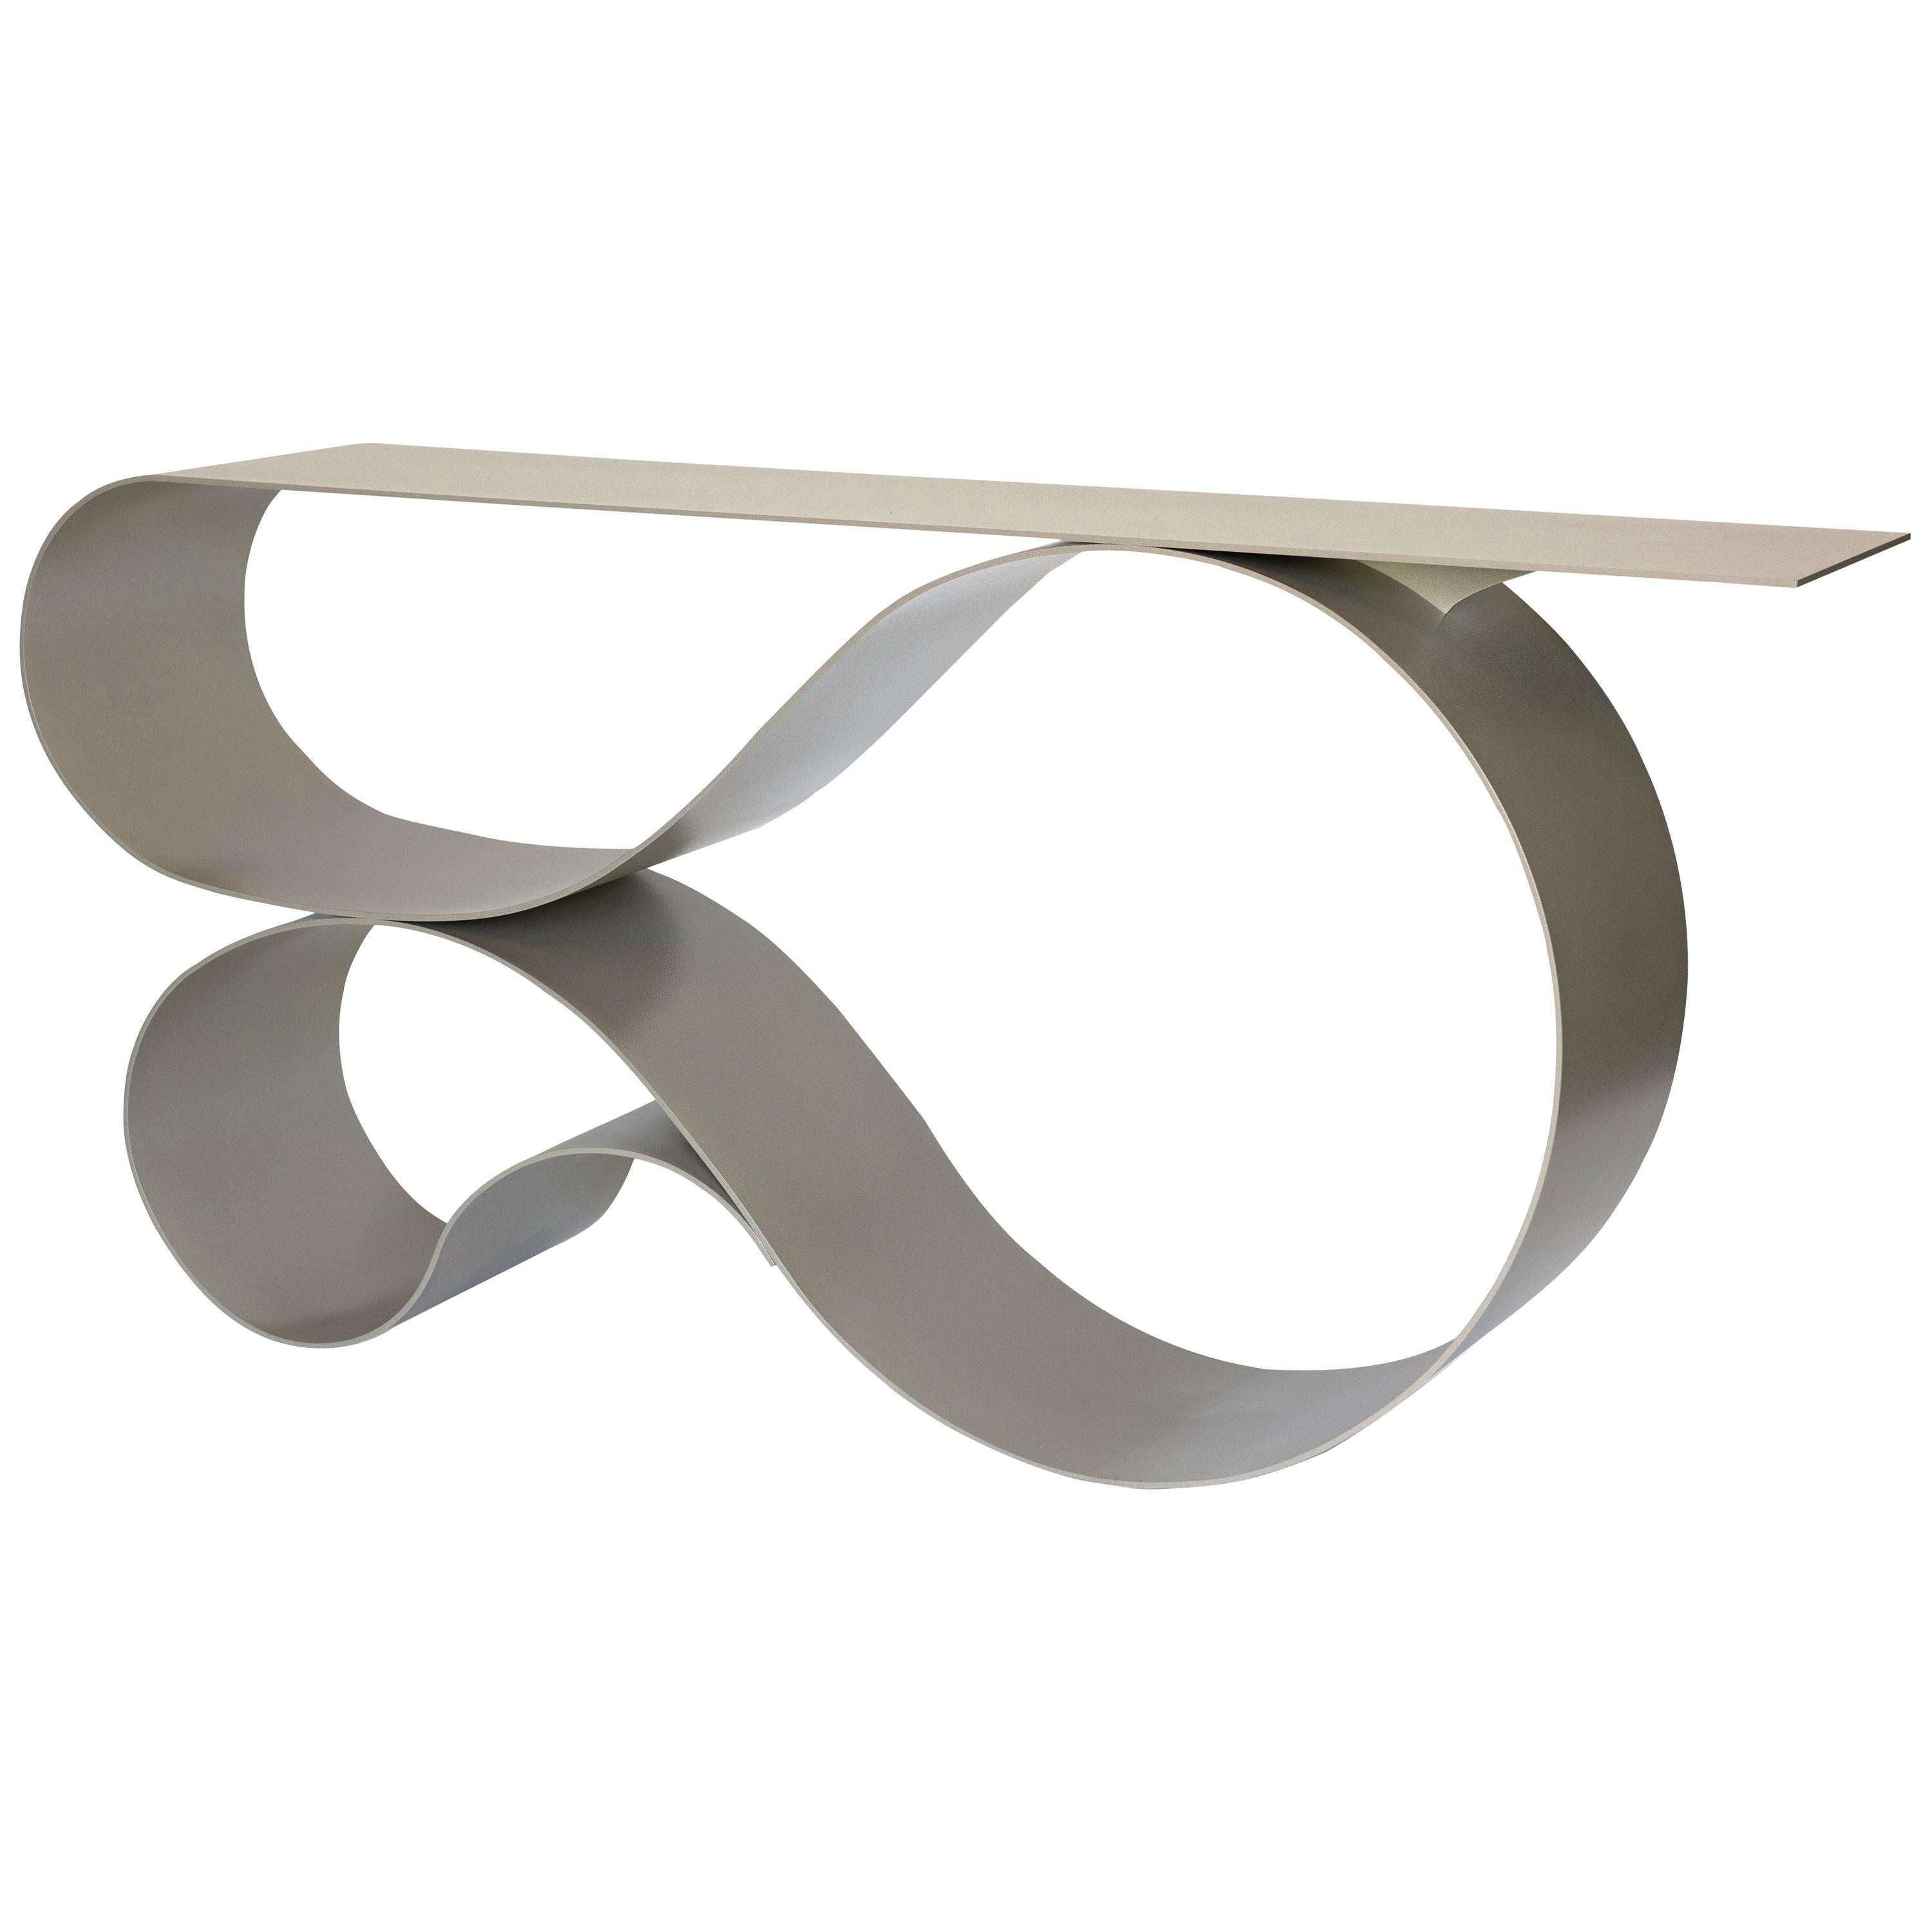 Whorl Console, in Beige Powder Coated Aluminum by Neal Aronowitz For Sale